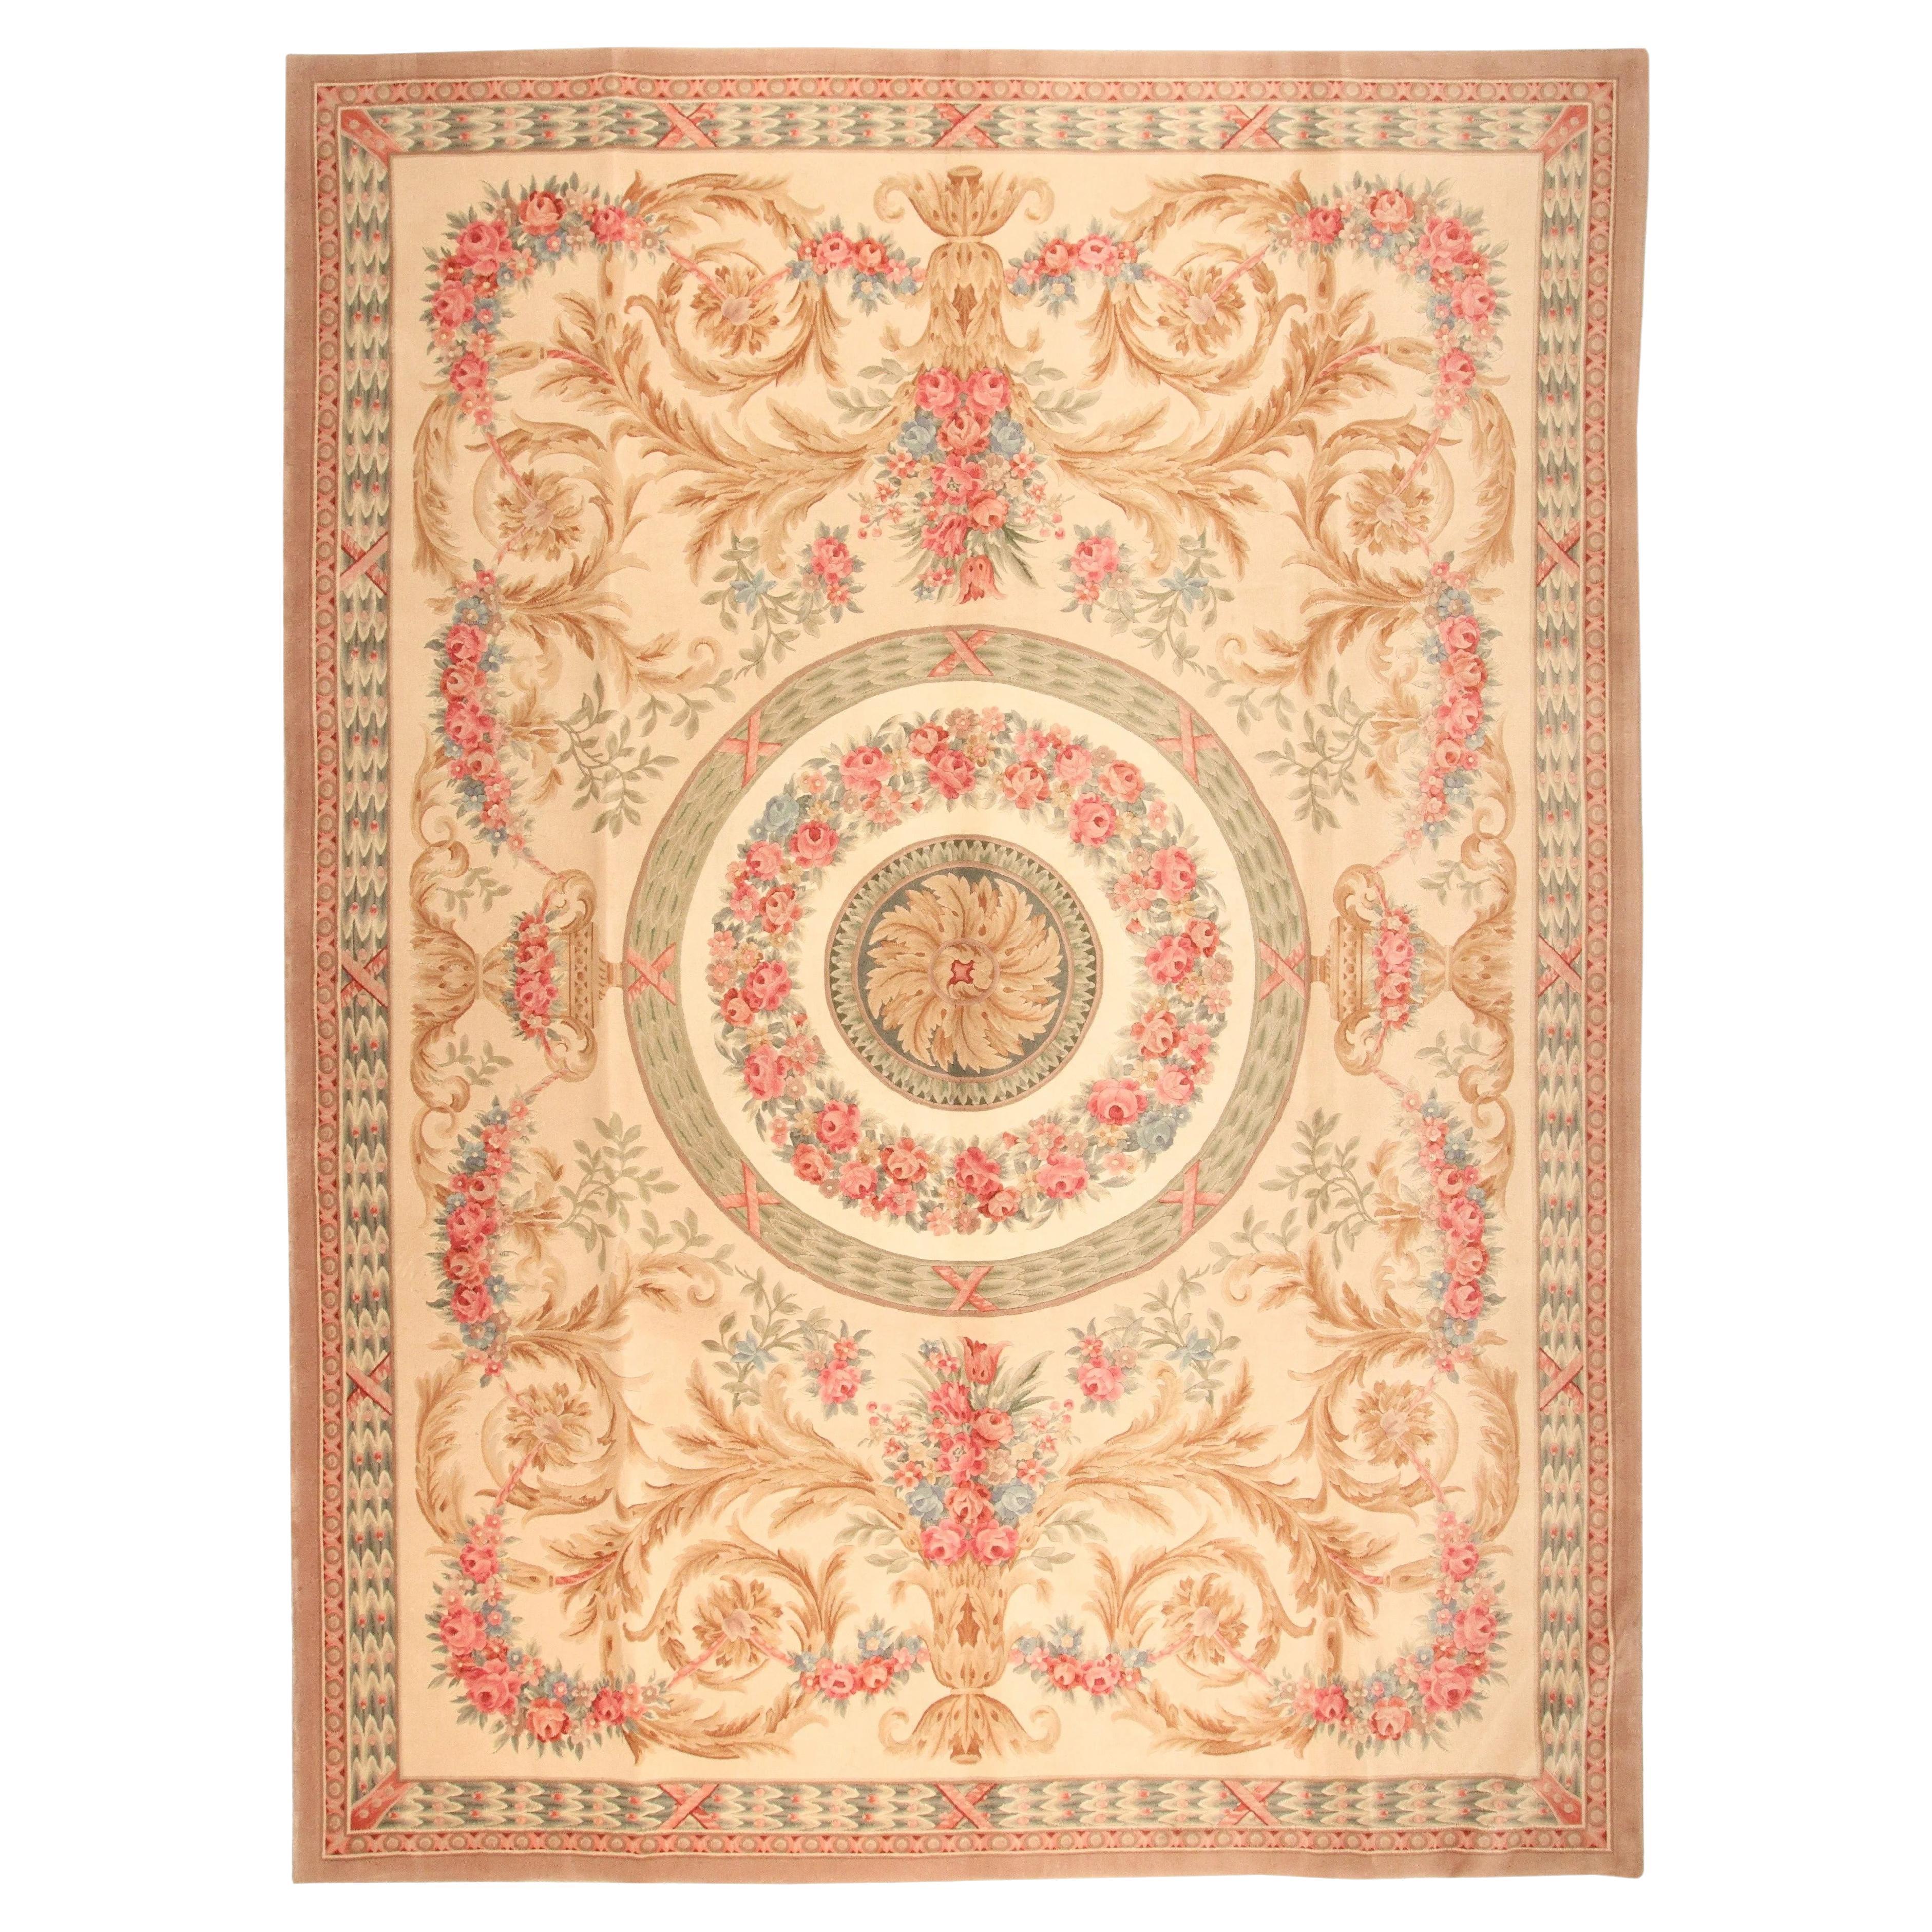 VIA COMO 'Venetian Soft' 10x13 Rug Hand Knotted Carpet One of a Kind Wool & Silk For Sale